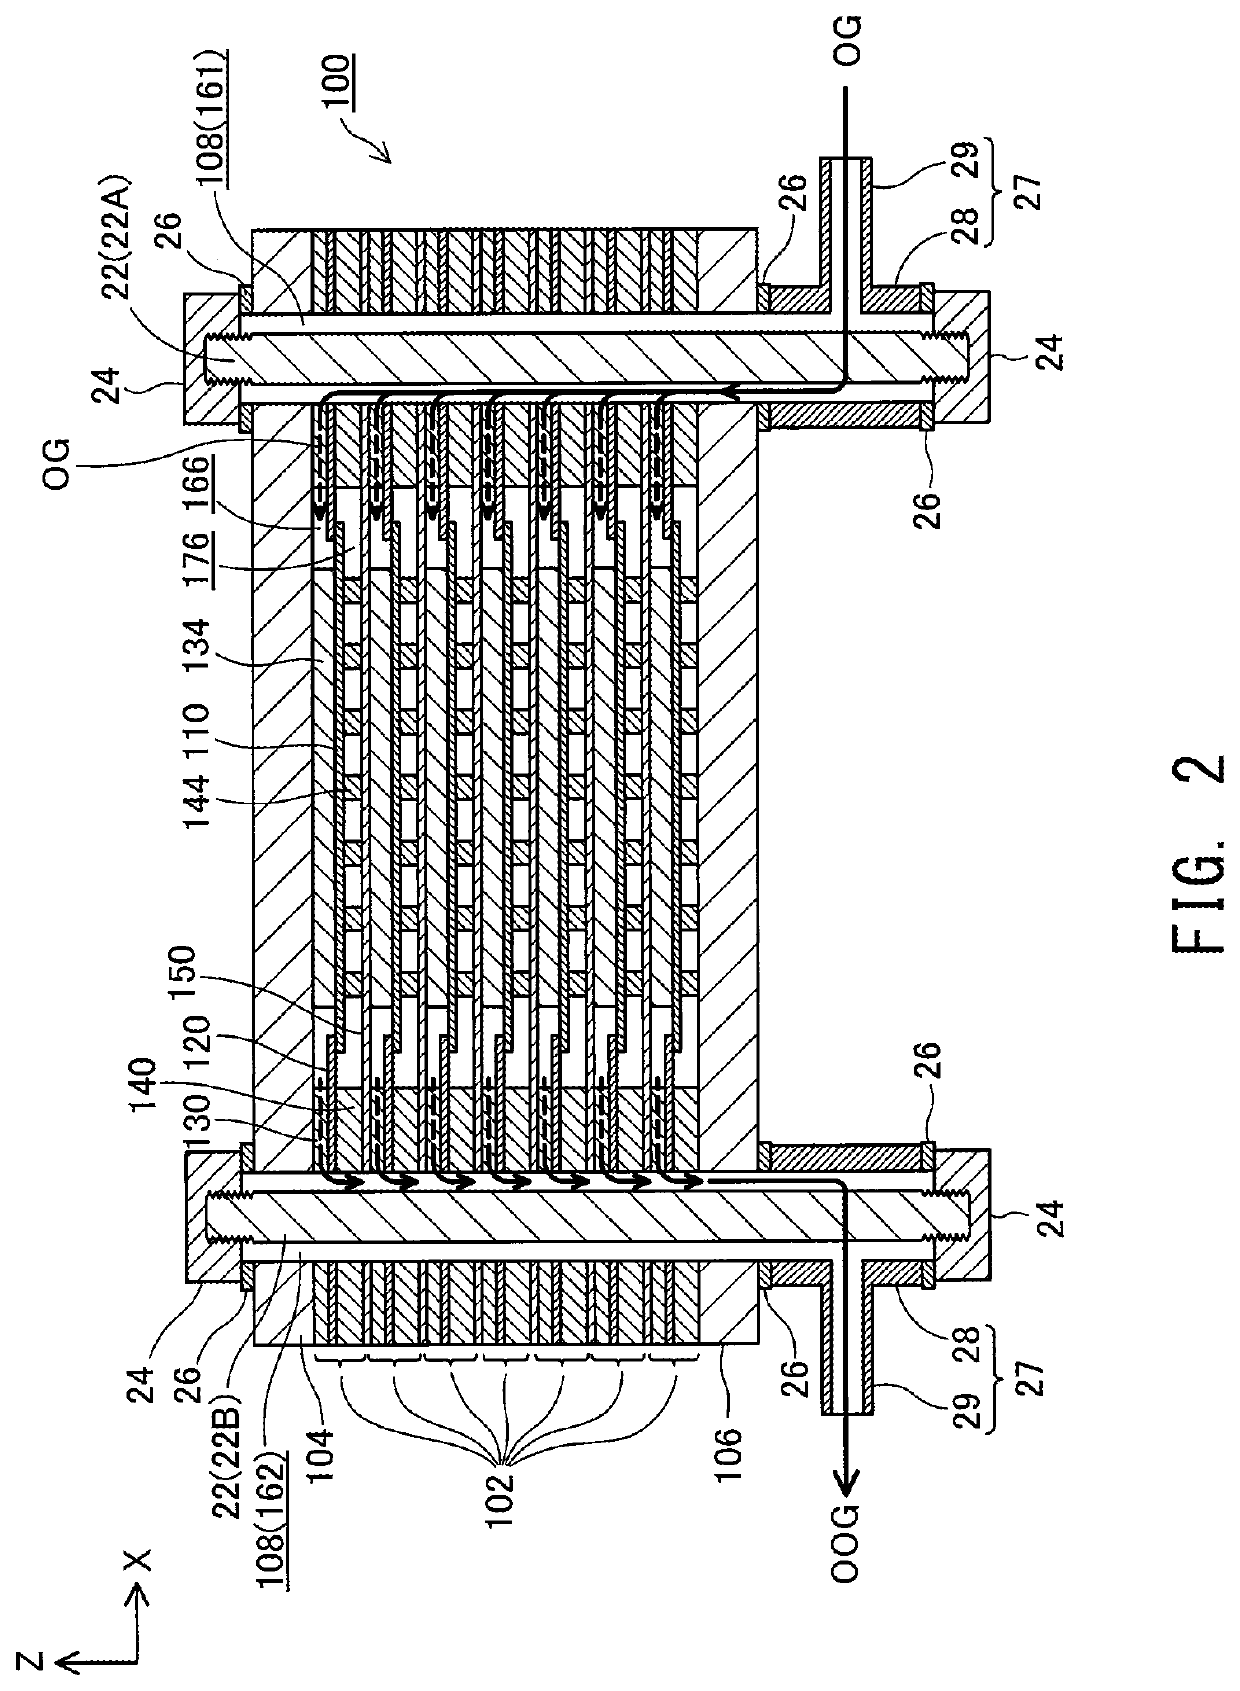 Electrochemical reaction unit cell, and electrochemical reaction cell stack